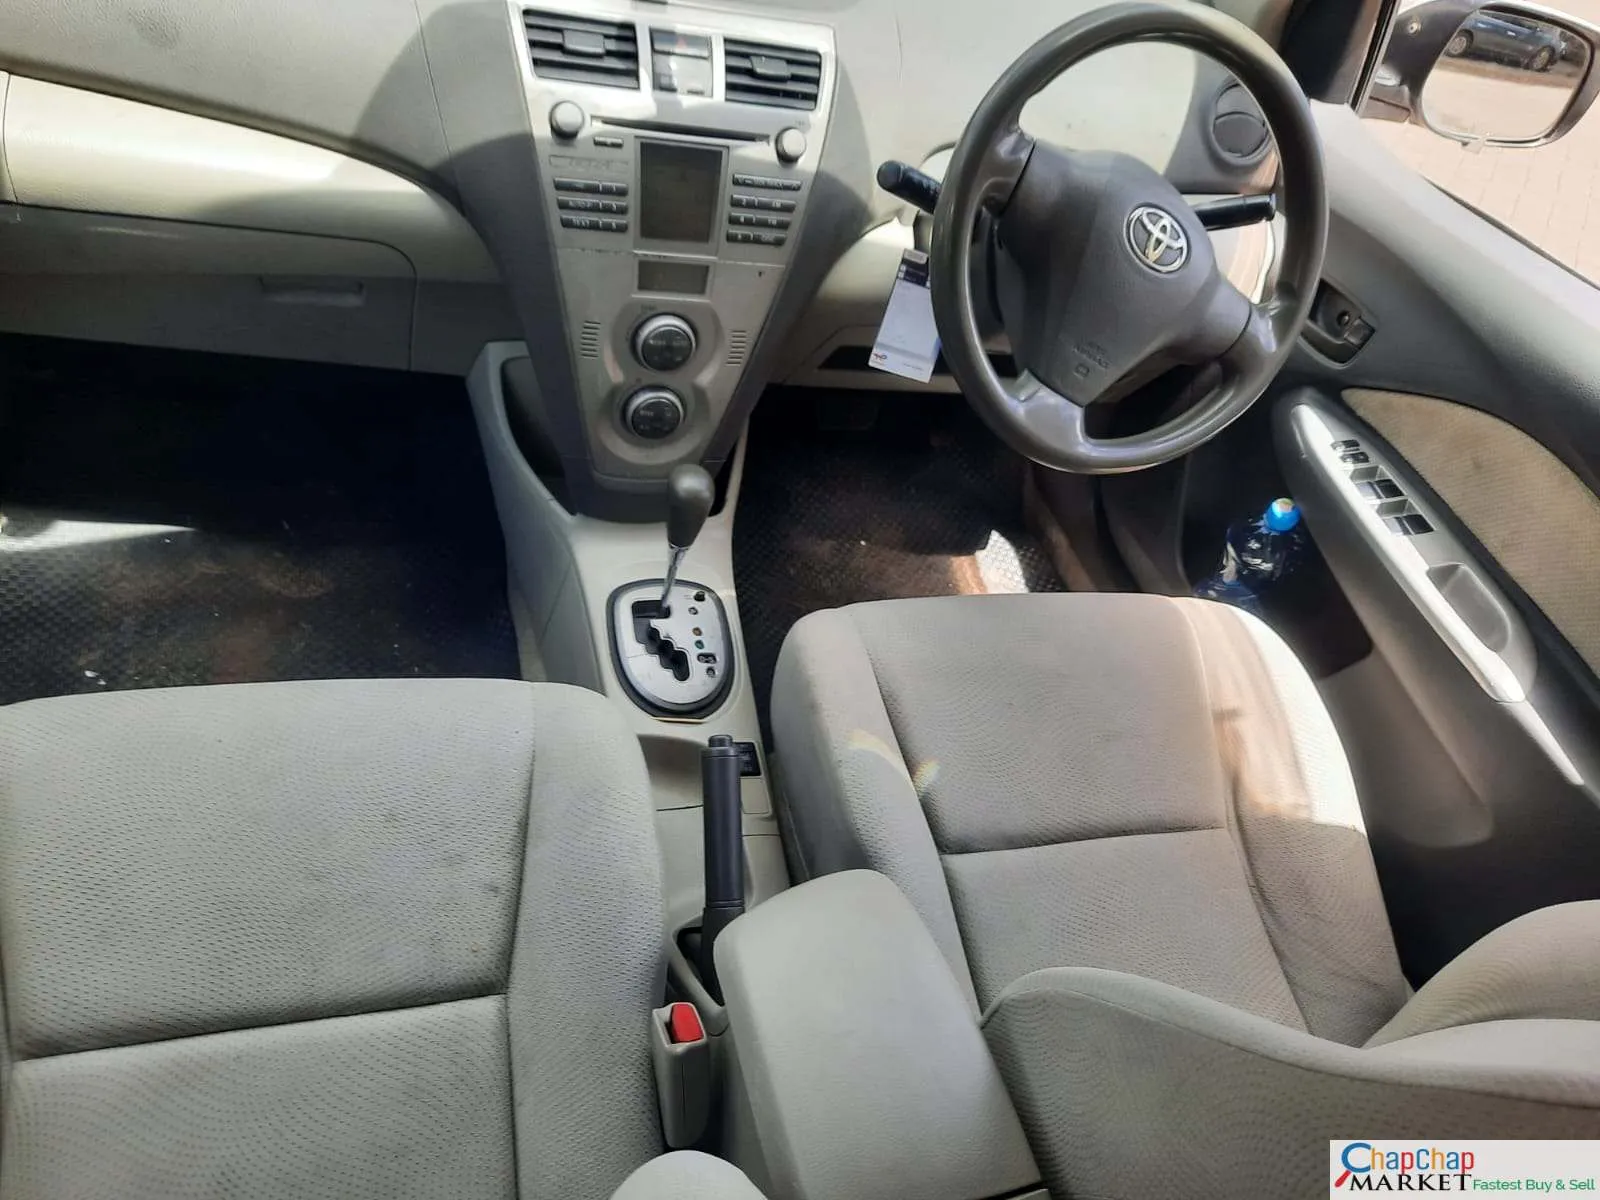 Toyota BELTA 1300cc QUICK SALE You Pay 30% Deposit Trade in OK EXCLUSIVE Toyota belta for sale in kenya hire purchase installments